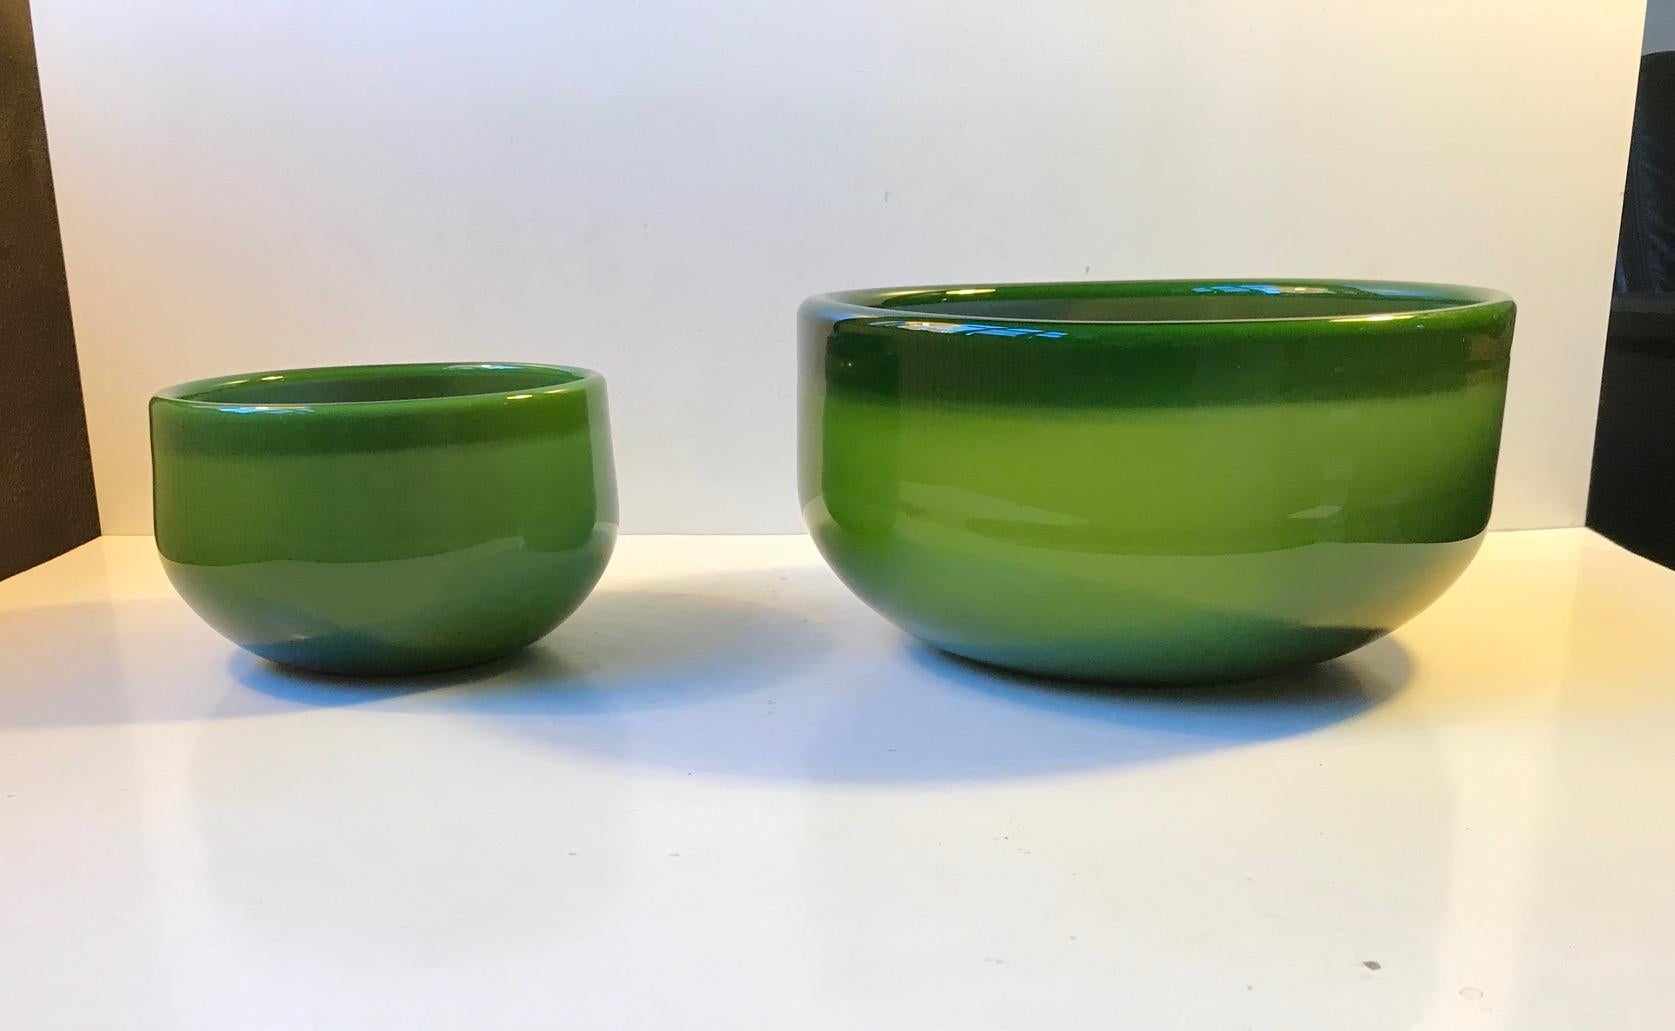 A matching set of Palet bowls in cased green Opaline glass. Designed by Michael Bang for Holmegaard, circa 1970. The set are hand blown and features the characteristic folded collars.